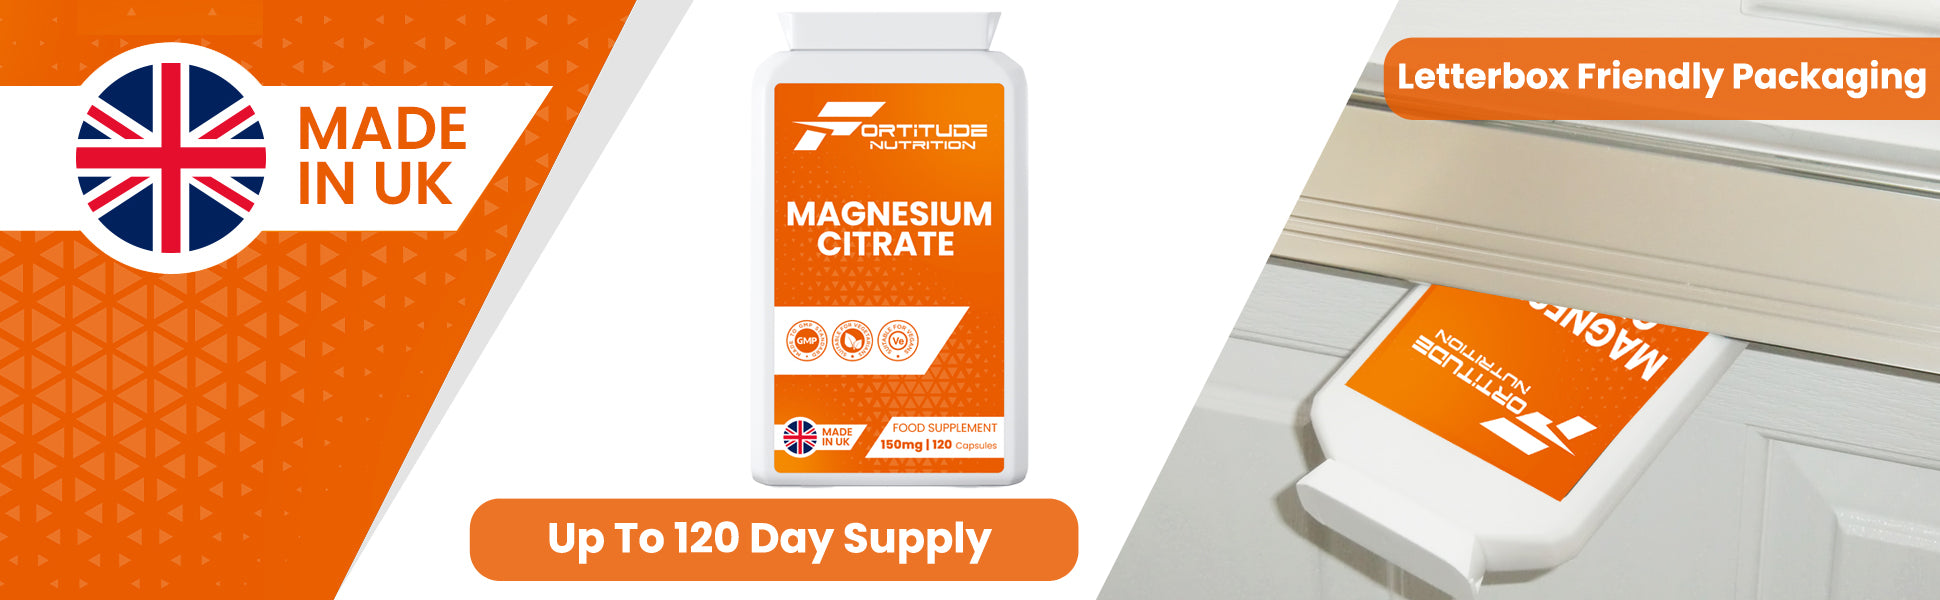 Magnesium Citrate Supplements In Letterbox Friendly Packaging